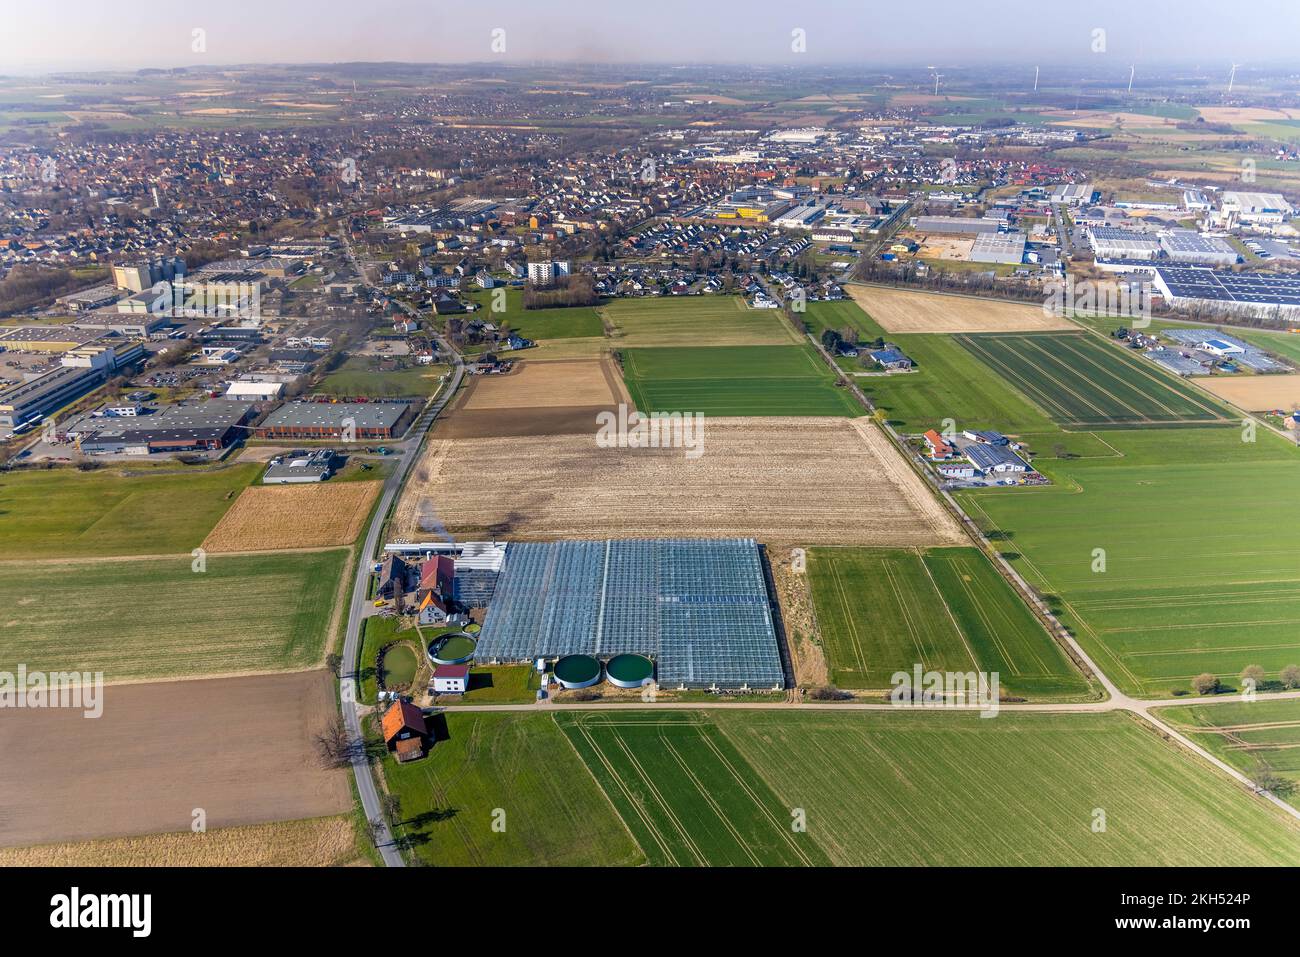 Aerial view, agricultural farm Gartenbau Stemann and view to Werl, Werl, Soester Börde, North Rhine-Westphalia, Germany, DE, Europe, Agriculture, Agri Stock Photo